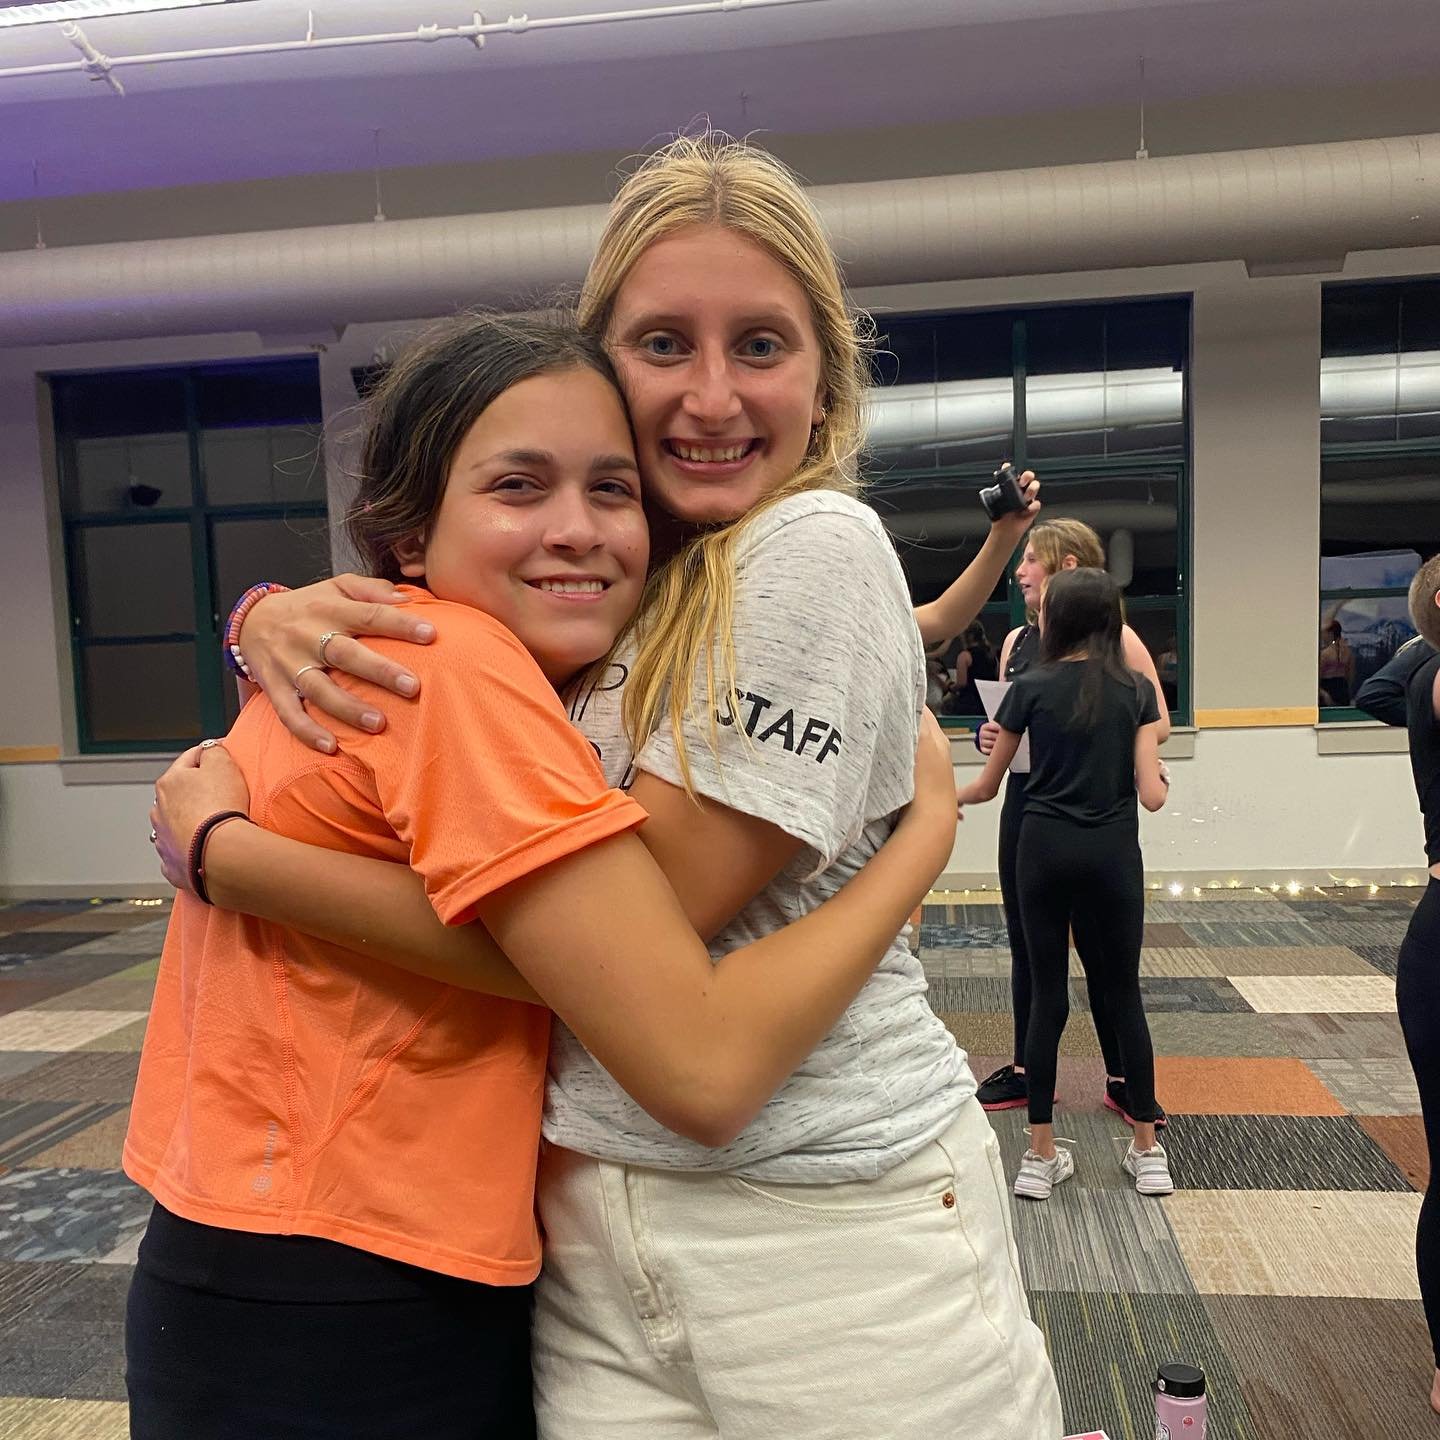 Camp Telaphiba is more than just a dance camp; it's a haven where children thrive in a safe, supportive, and nurturing environment.🧡🏹

Check out our new blog post to hear more about how we build trust and create a safe haven at Camp T!!

https://ww